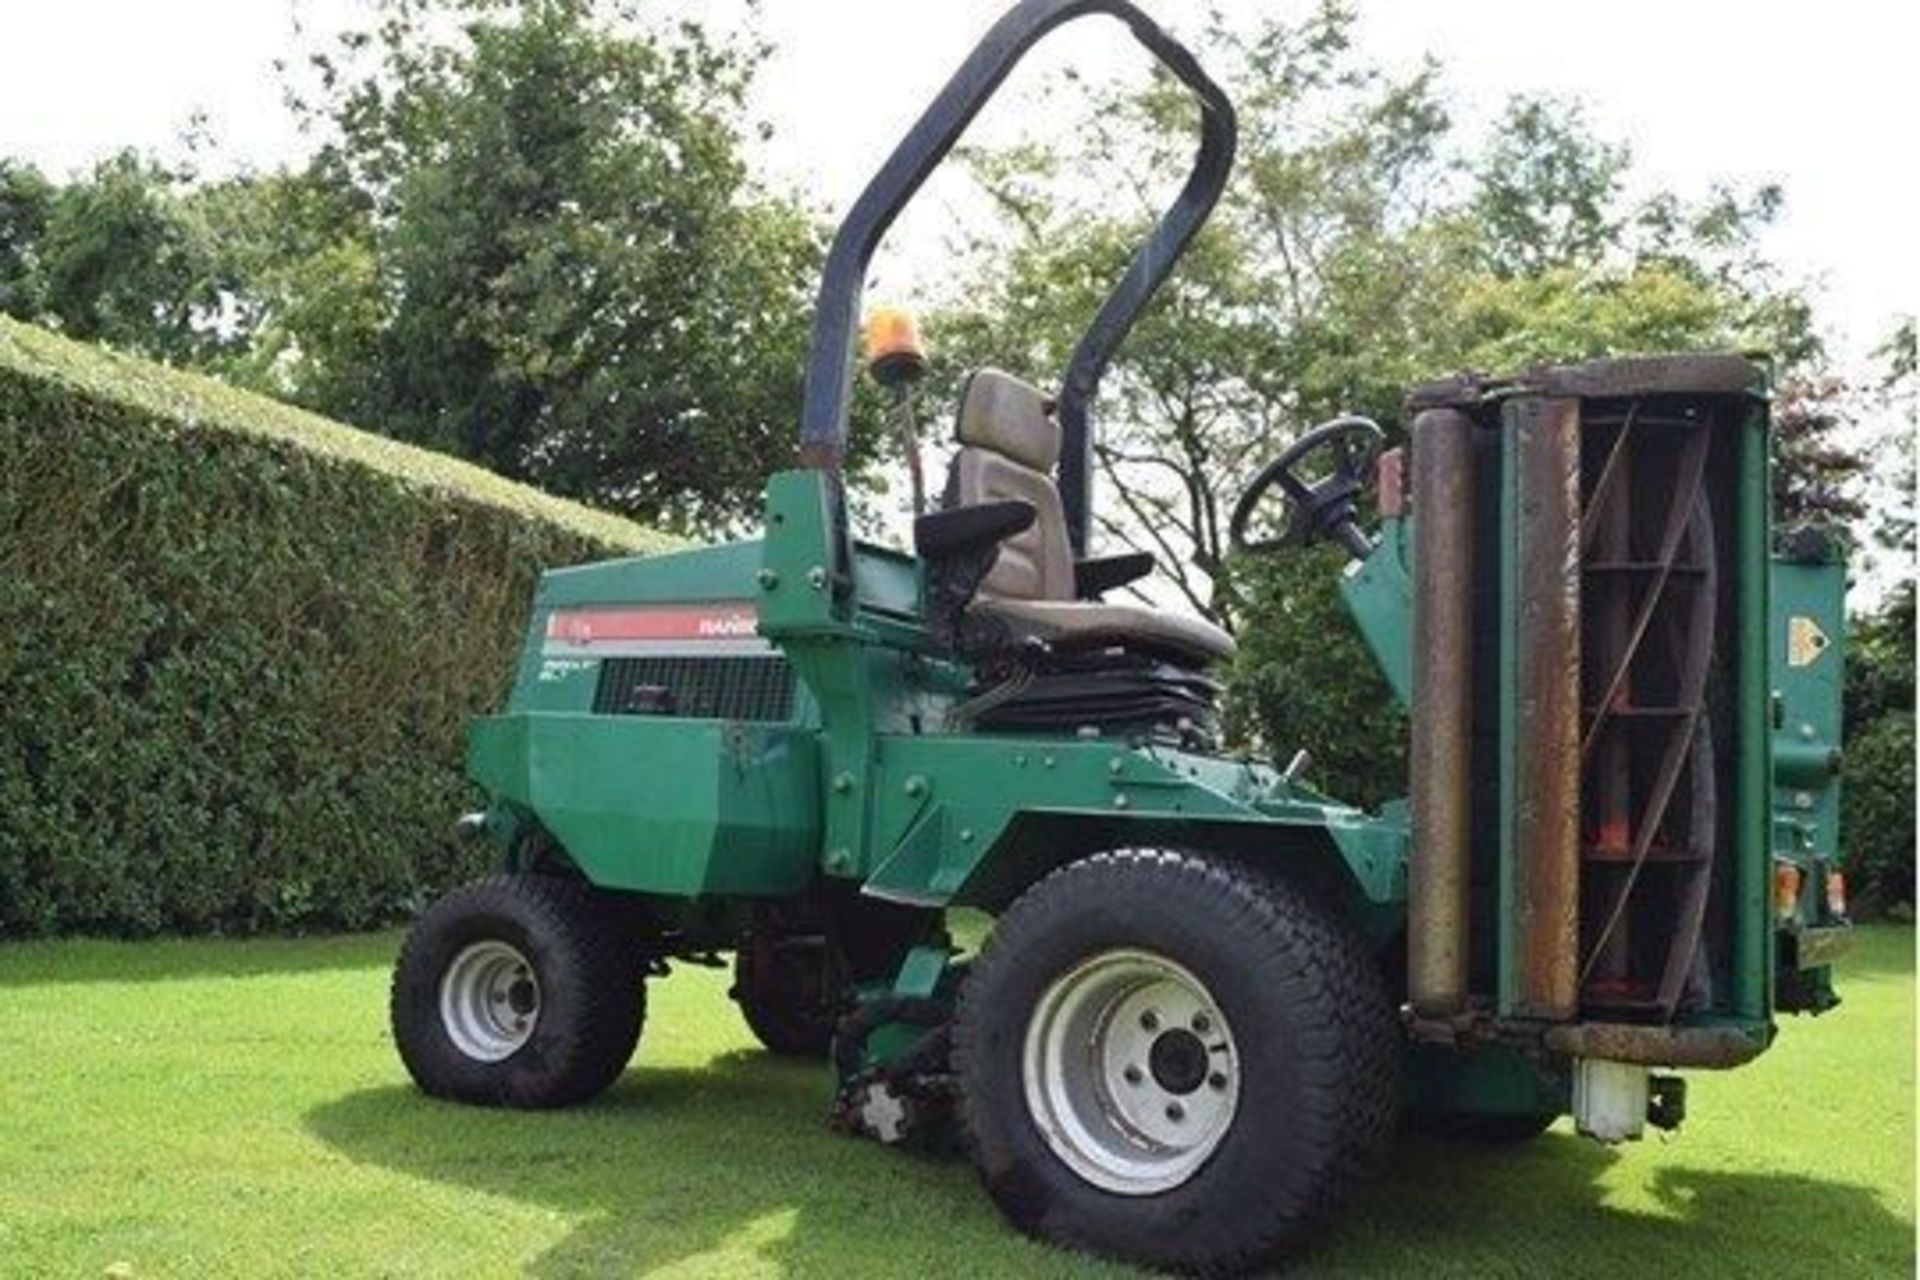 2003 Ransomes Parkway 2250 Plus Ride On Cylinder Mower - Image 5 of 7